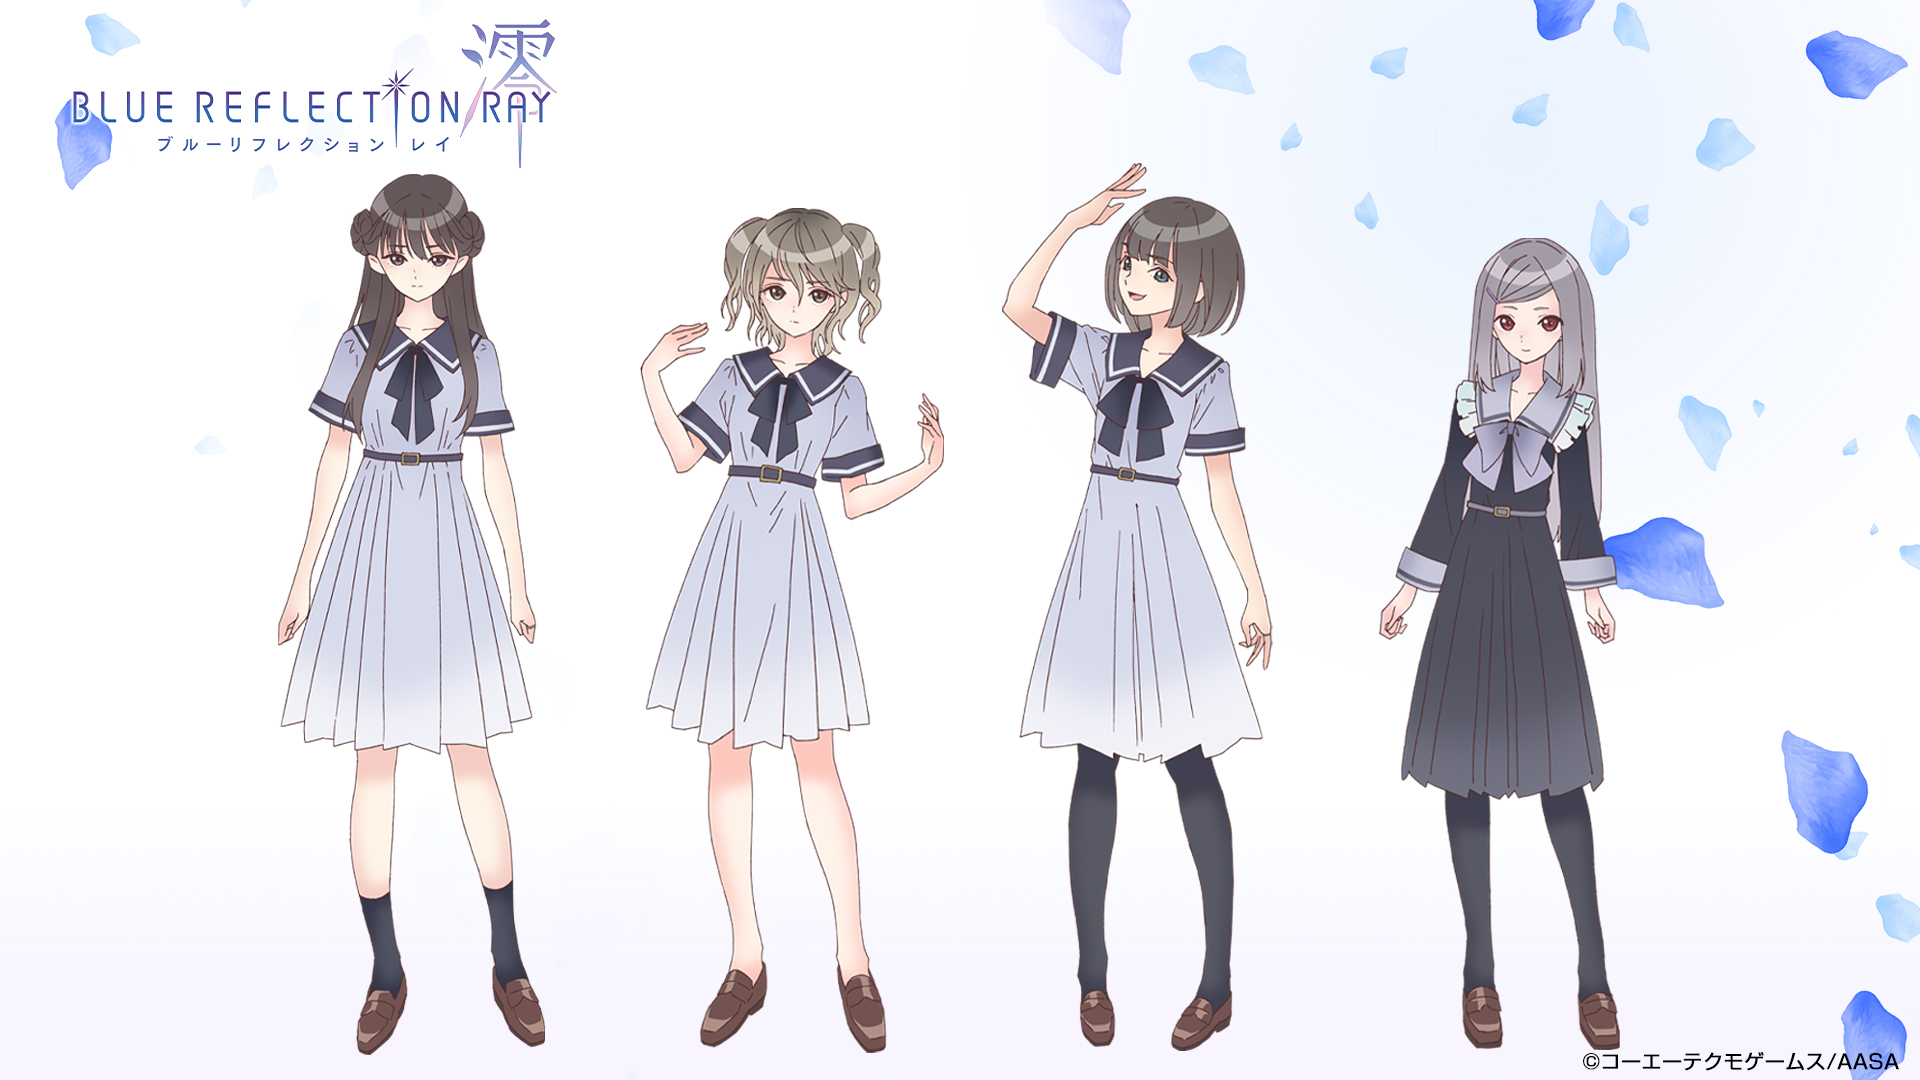 Blue Reflection Ray 澪4月放送 动漫论坛 Stage1st Stage1 S1 游戏动漫论坛